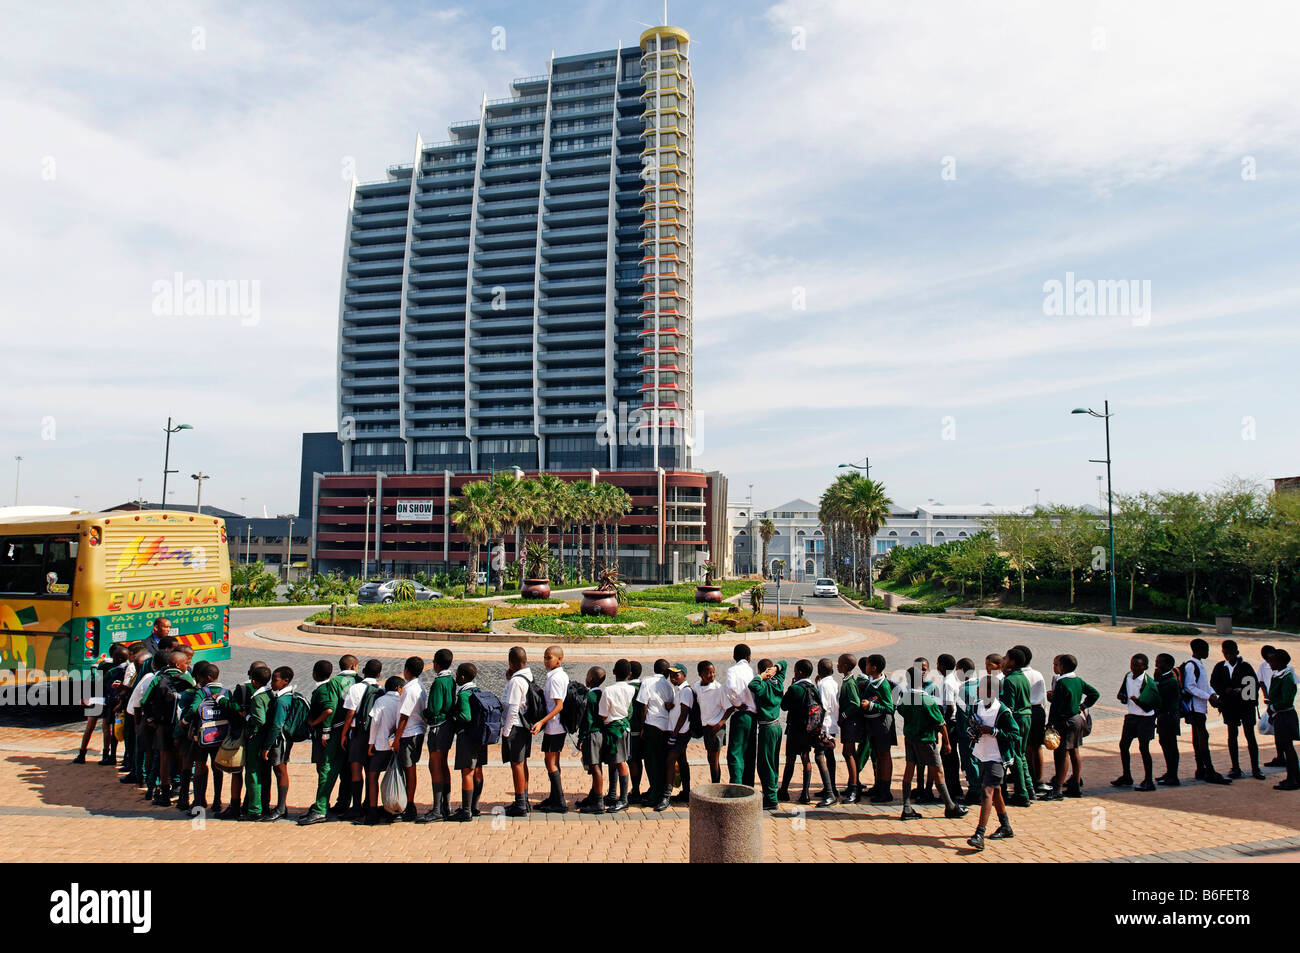 School children waiting for a bus in Durban, Kwazulu-Natal, South Africa Stock Photo